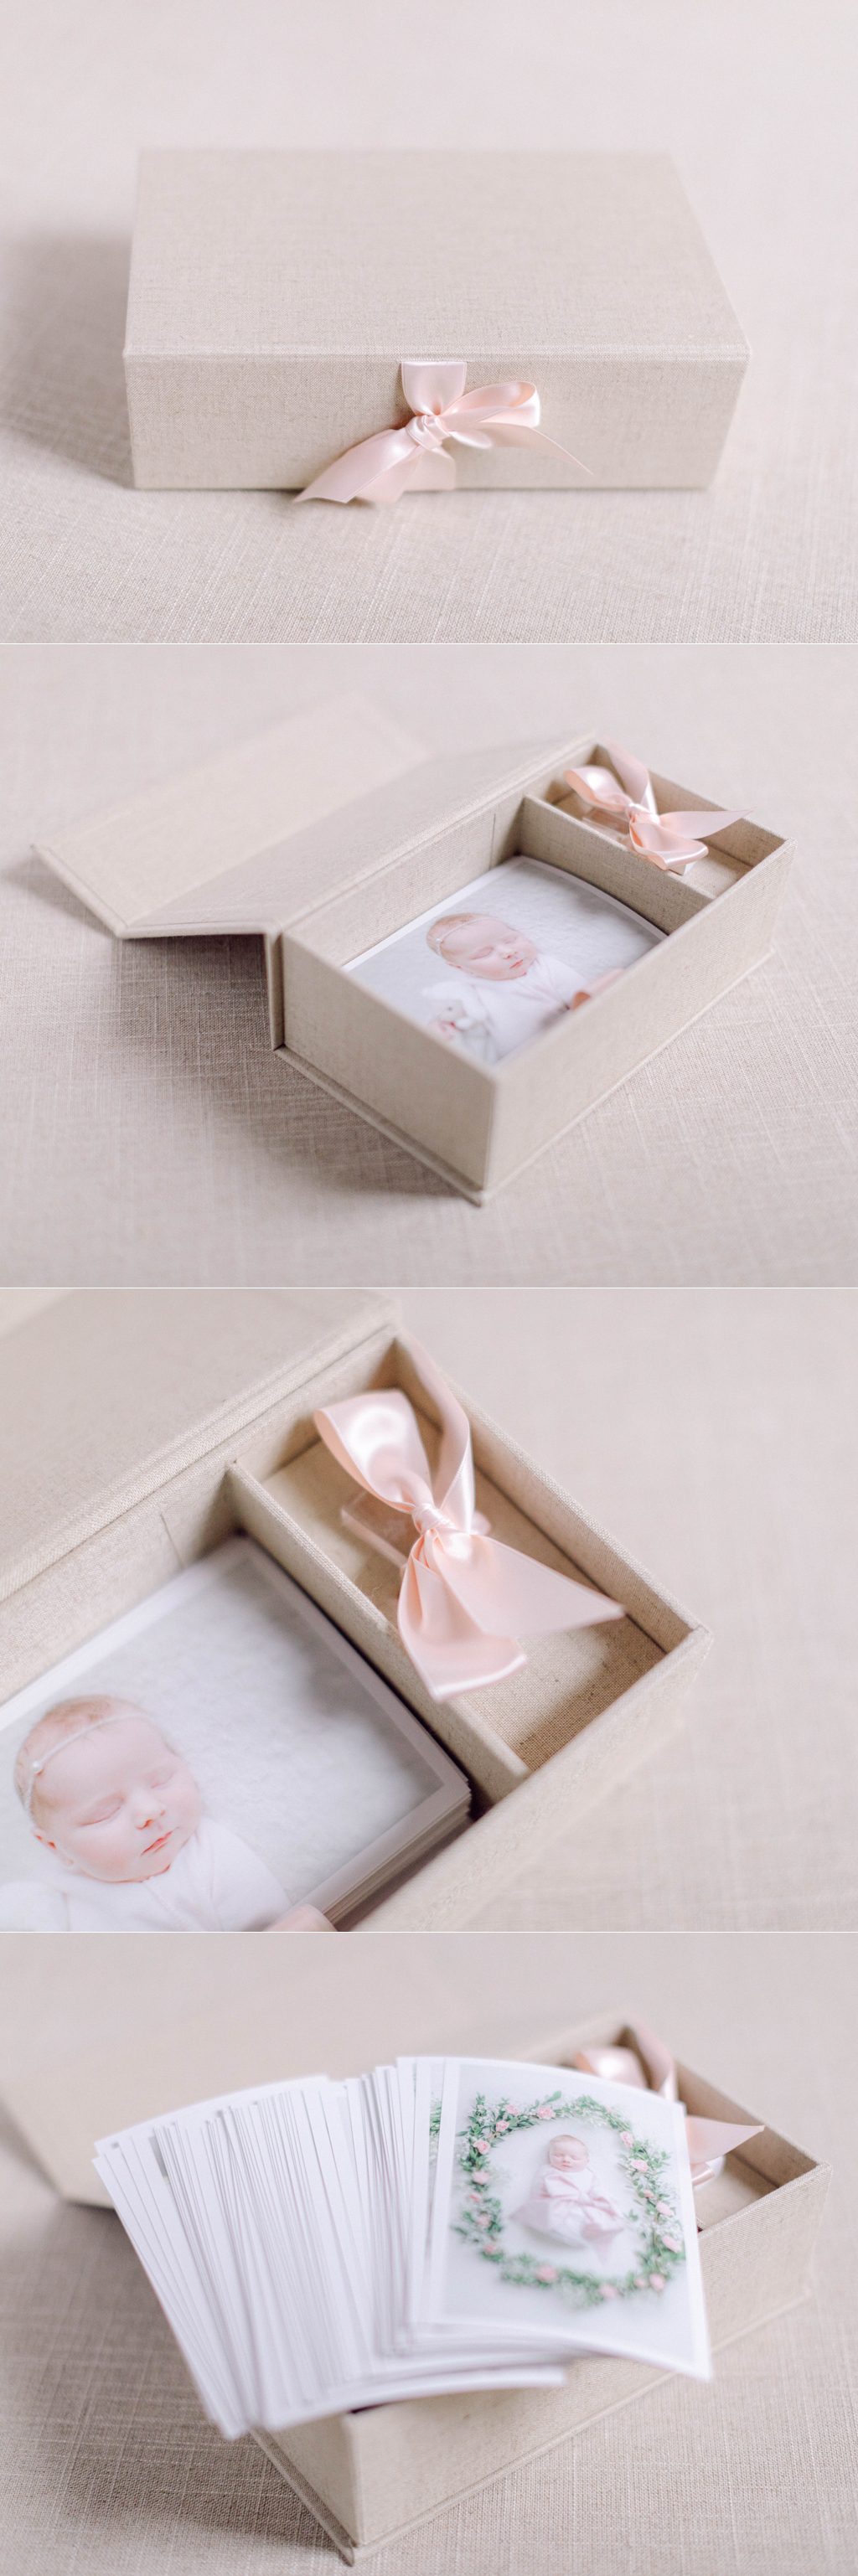 Product photography of a newborn photo product, the portrait box, offered by Athens, GA photographers.